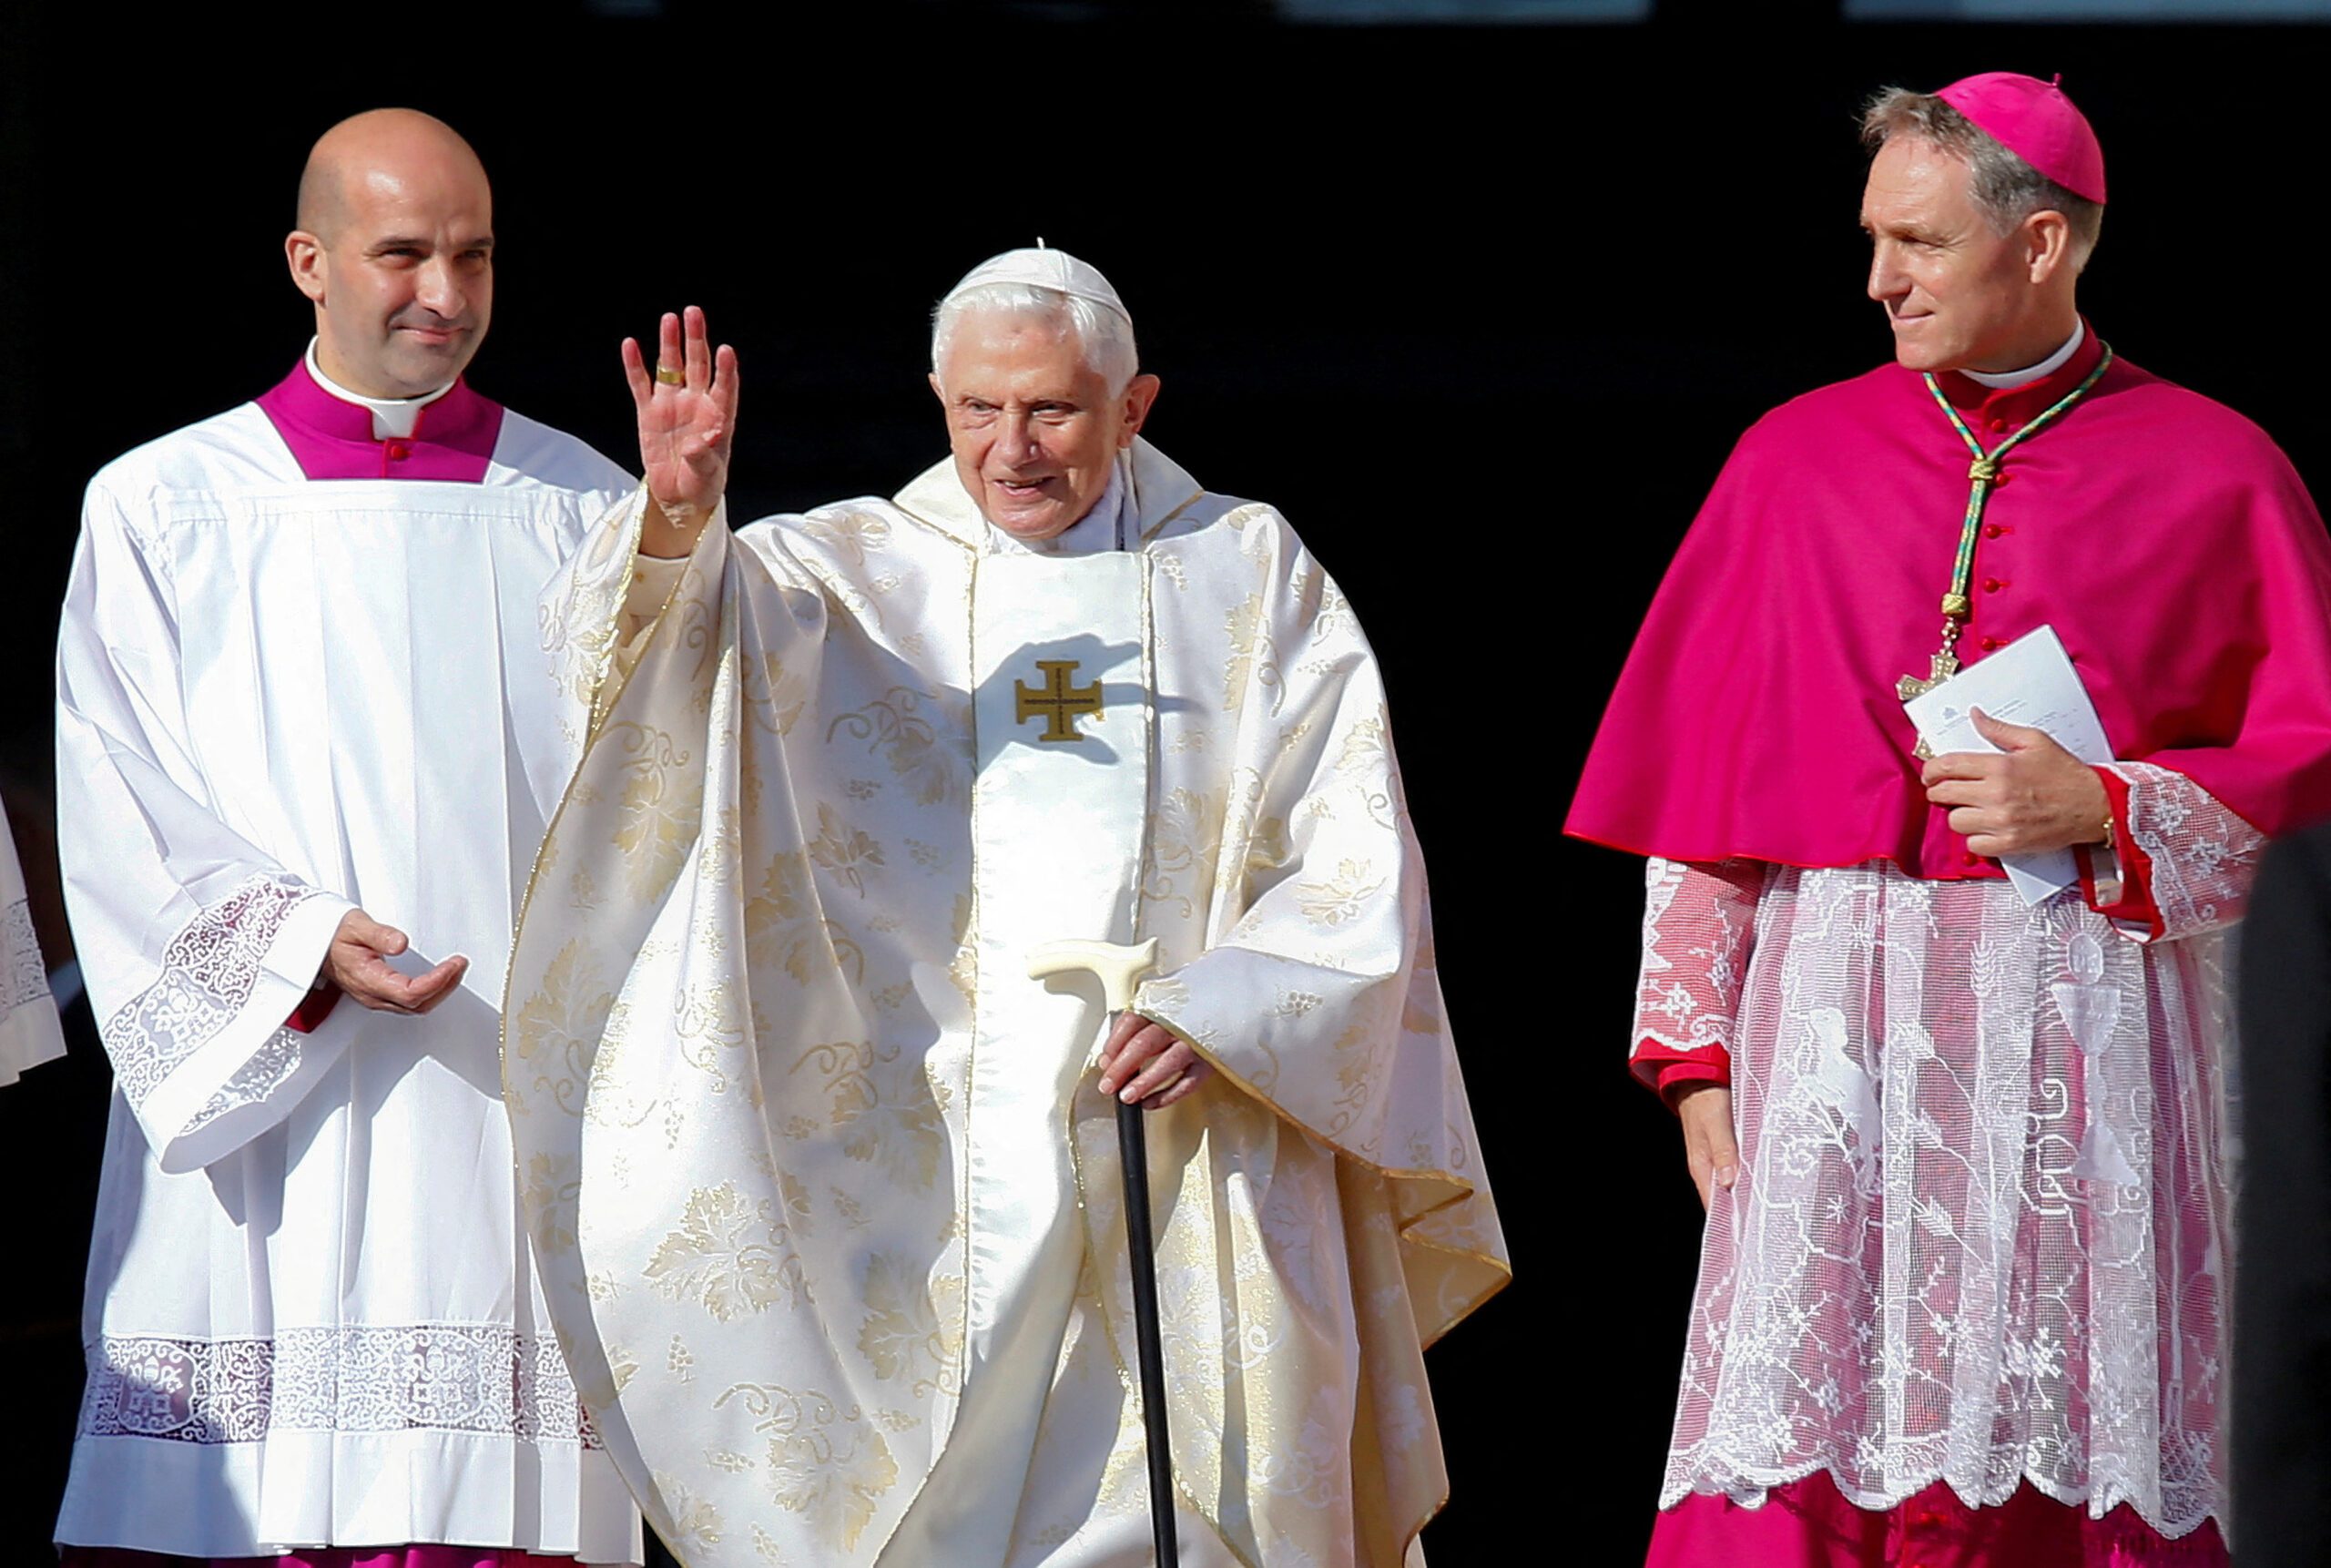 Rituals for Benedict’s passing could be template for future ex-popes